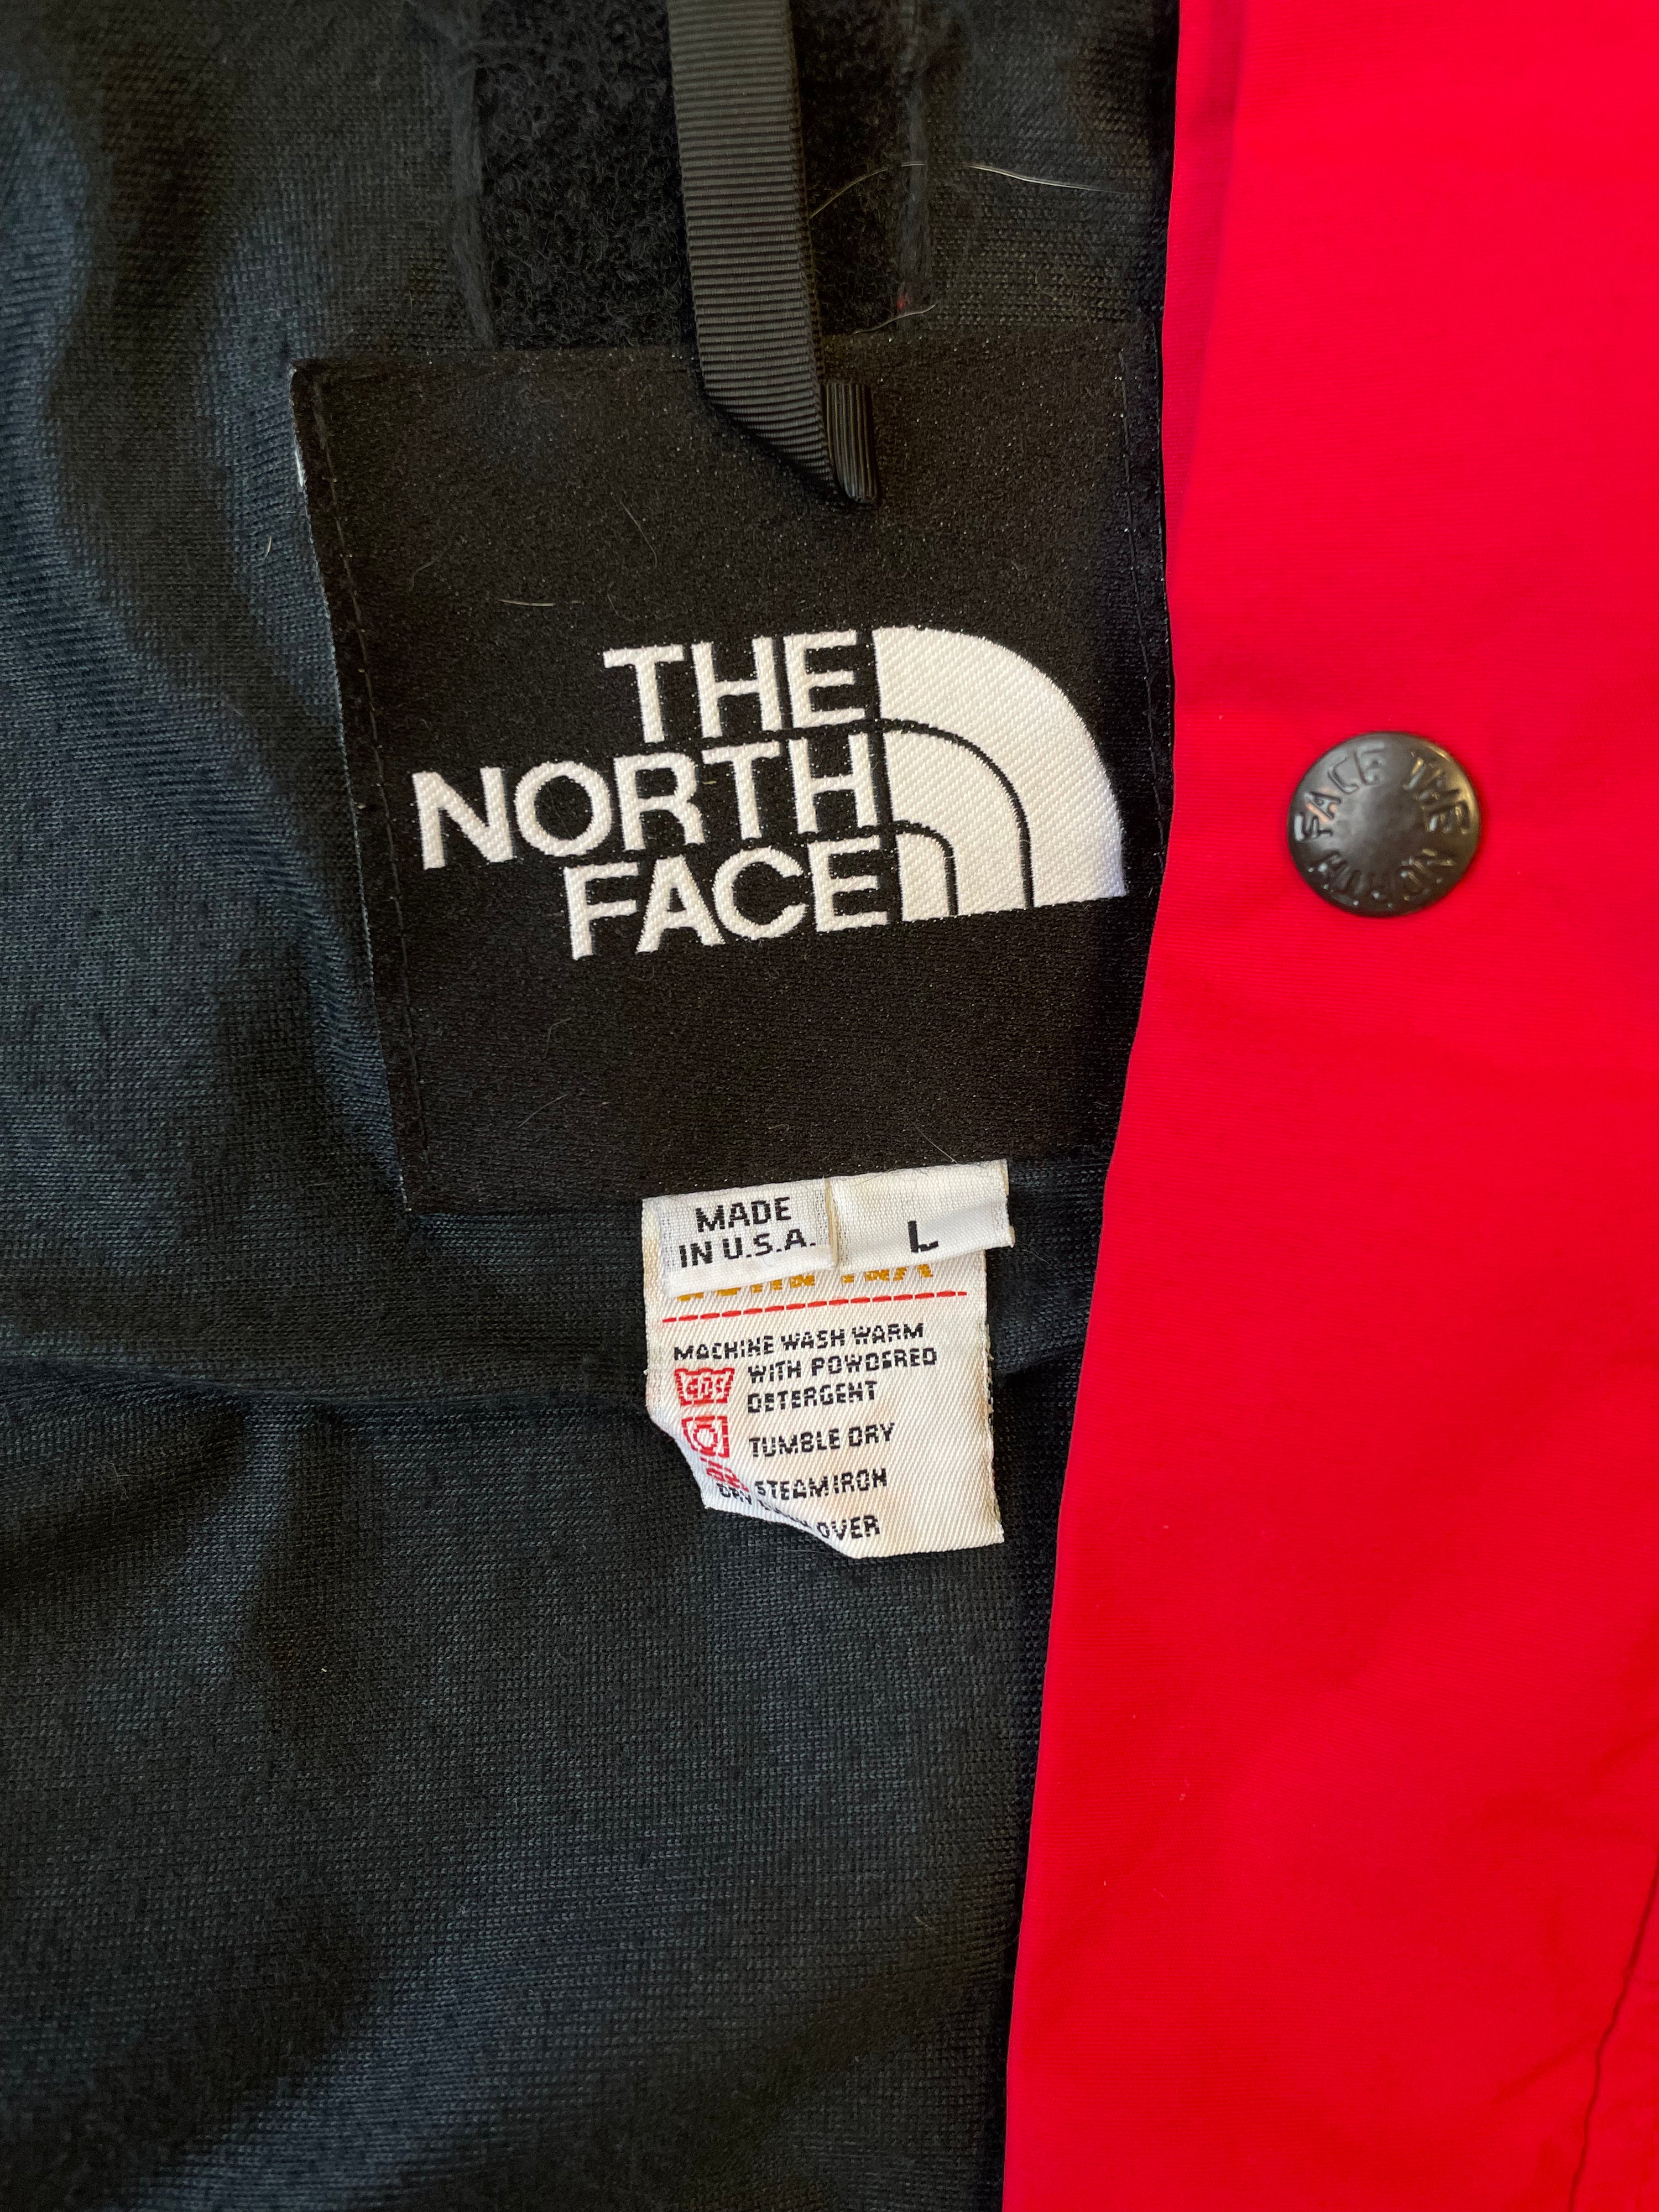 90s North Face Gore-Tex Mountain Jacket - Large/X-Large